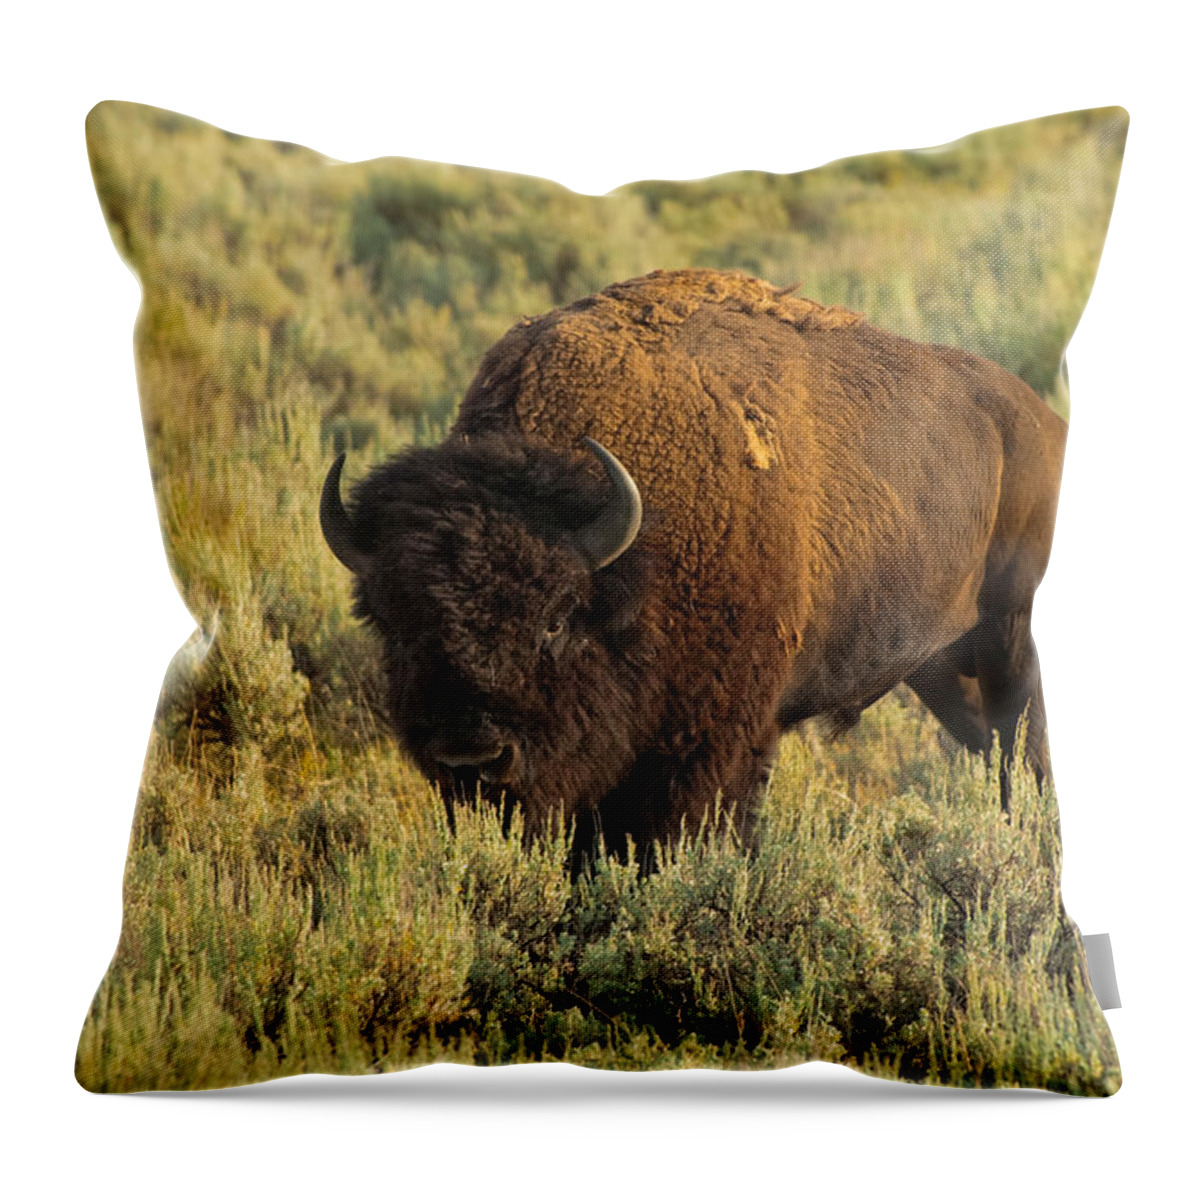 American Bison Throw Pillow featuring the photograph Bison by Sebastian Musial